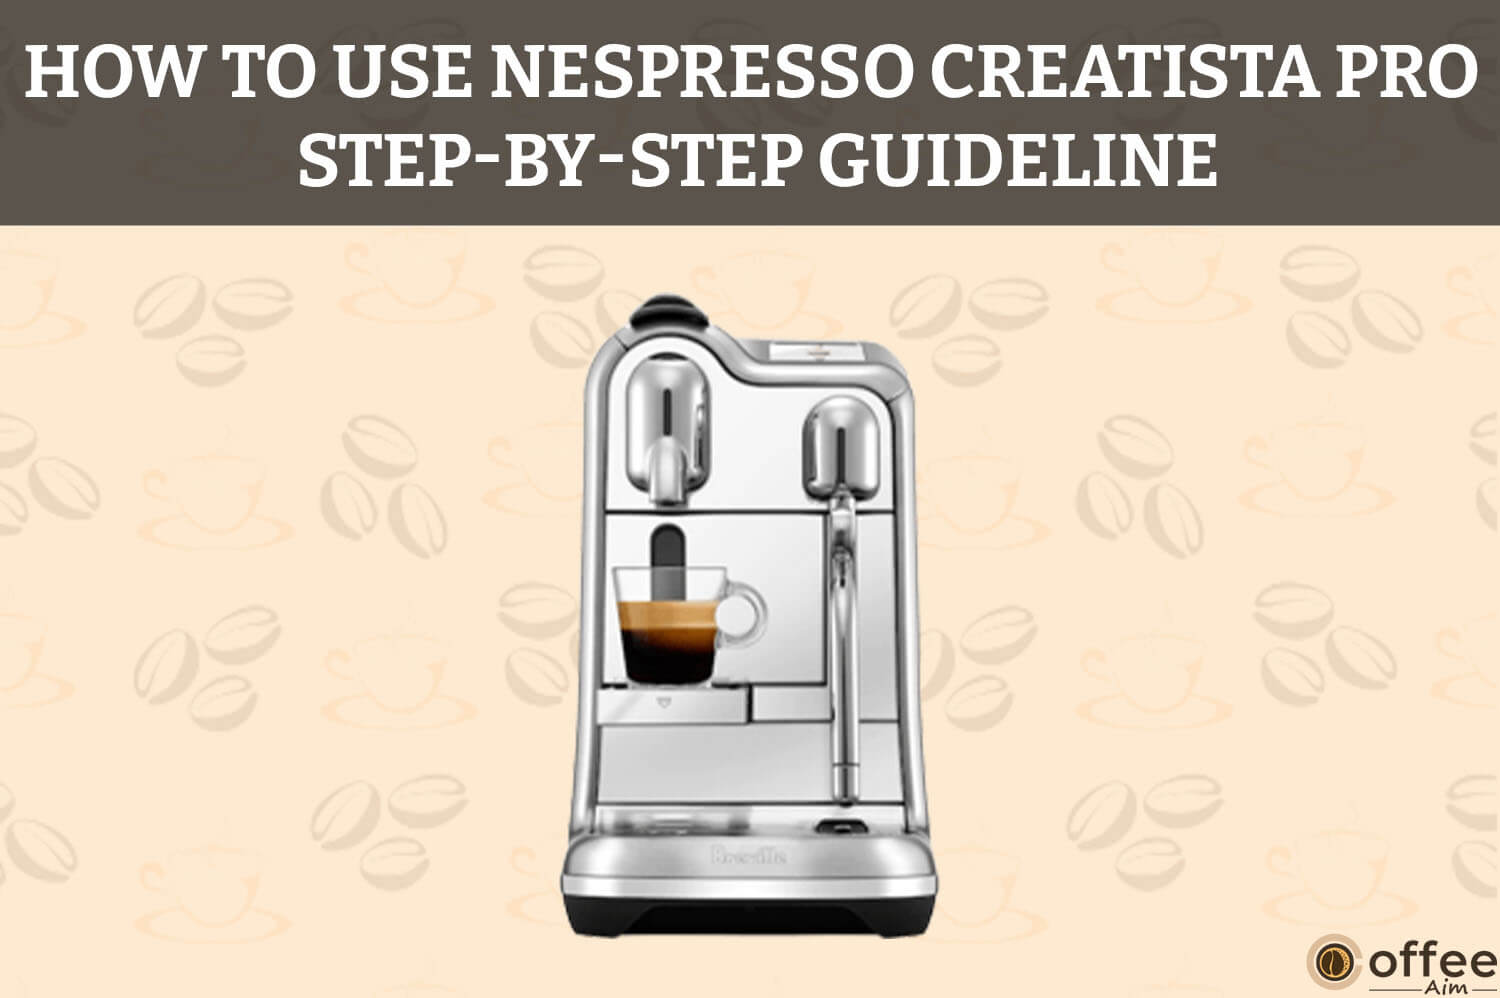 Featured image for the article "How To Use Nespresso Creatista Pro"